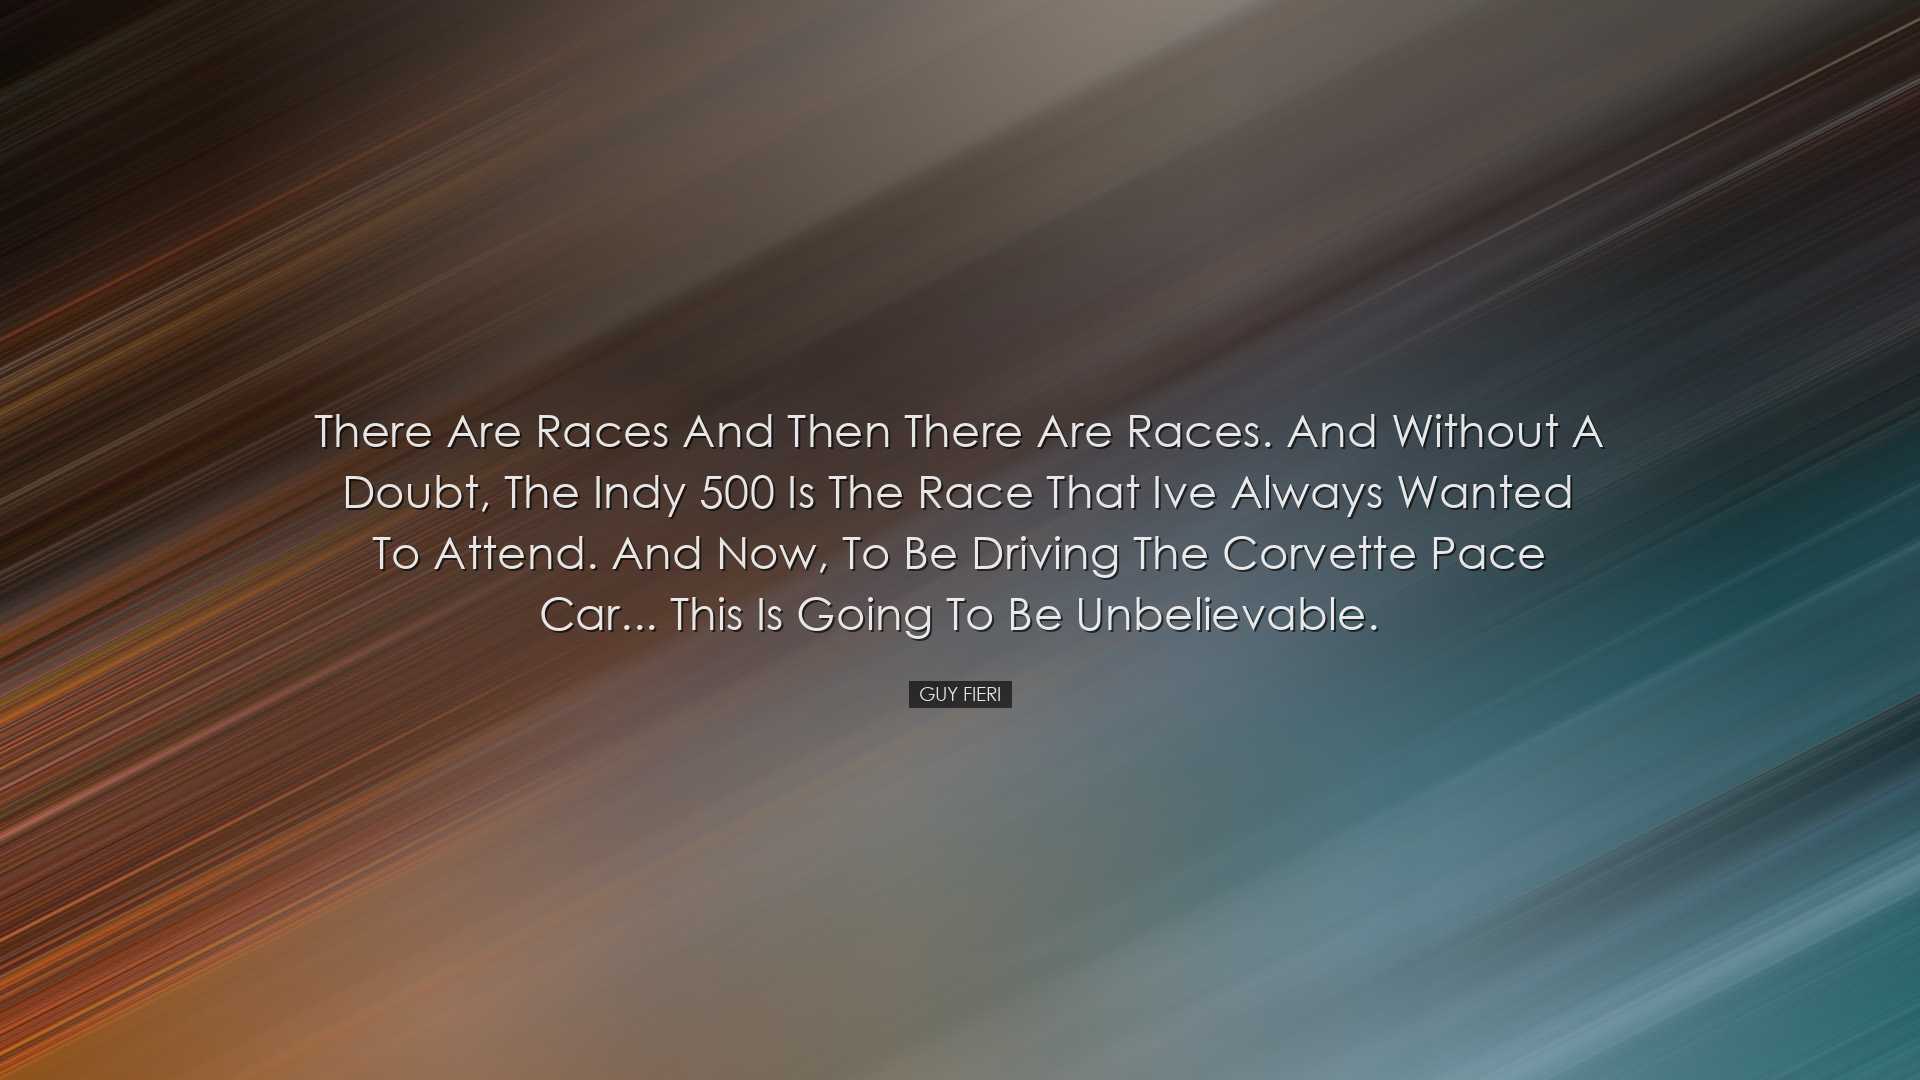 There are races and then there are races. And without a doubt, the